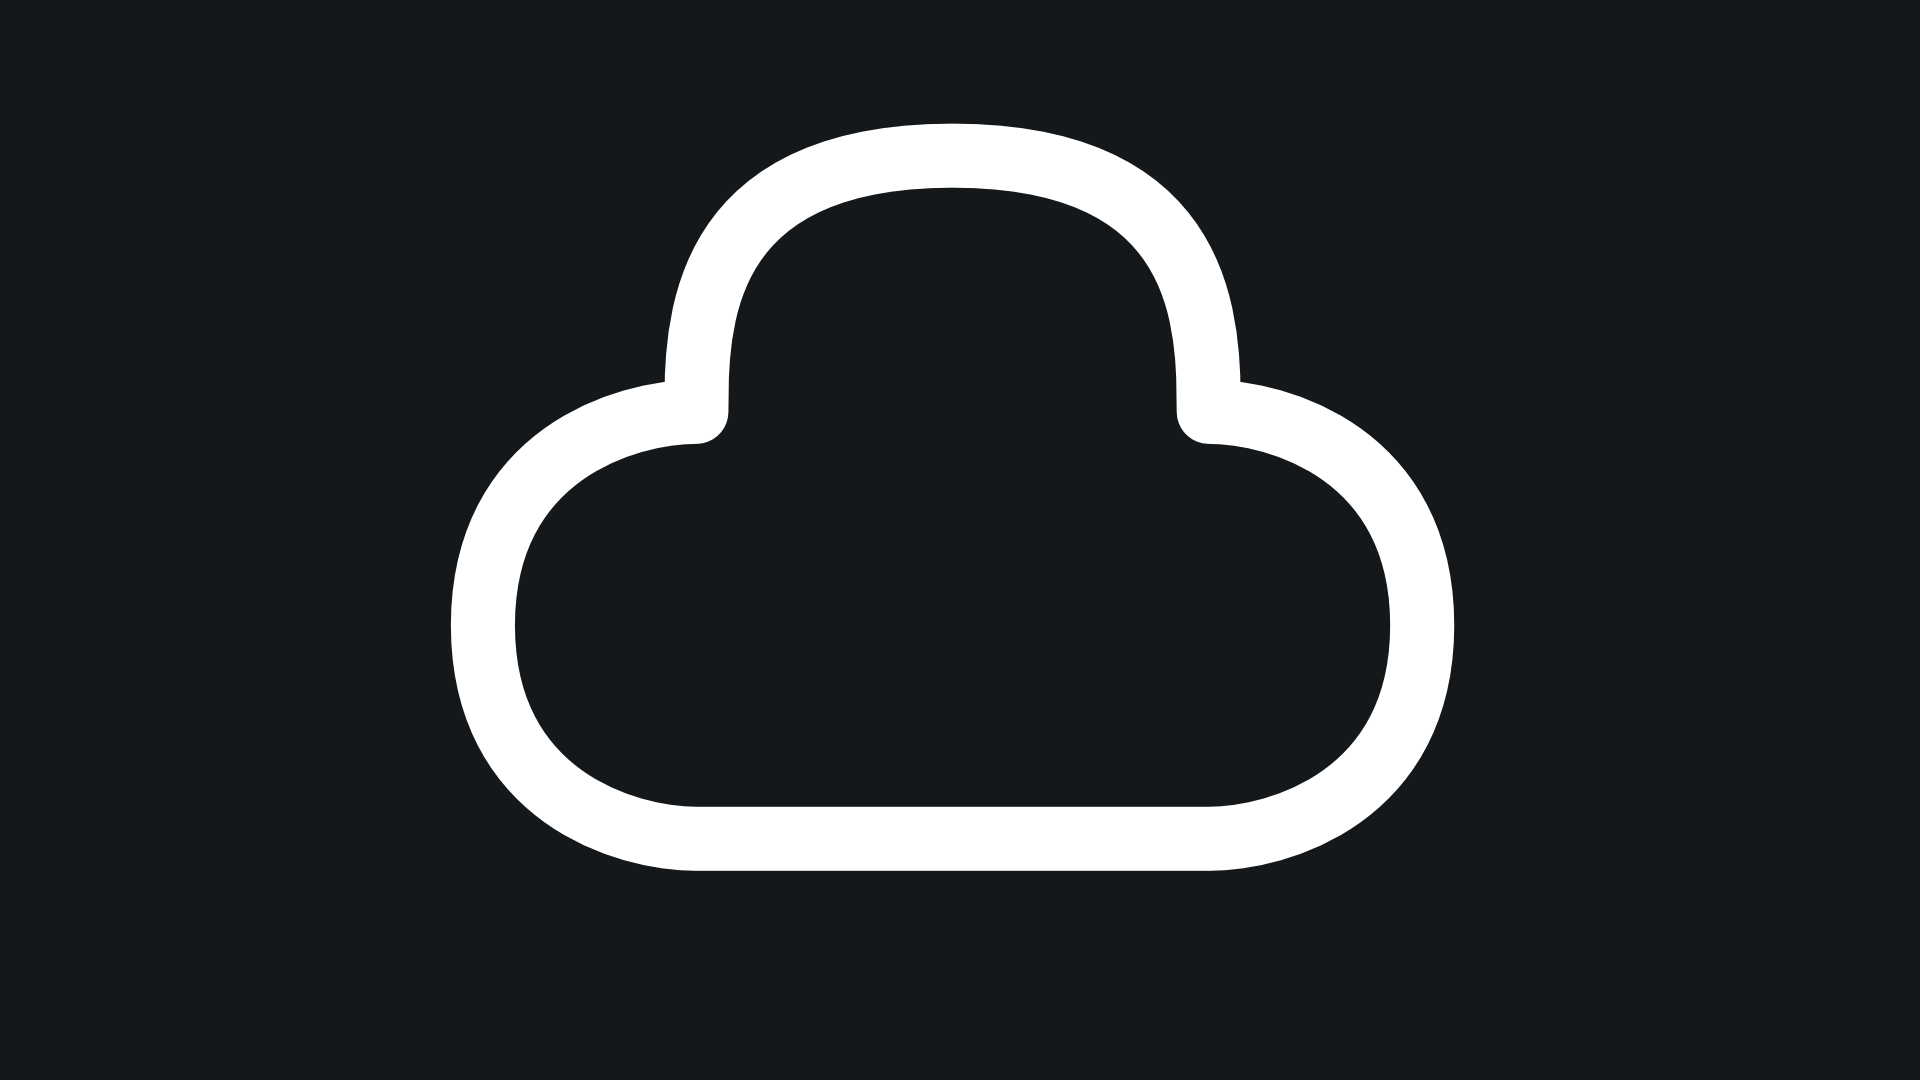 Cloud icon in the center in a black background.